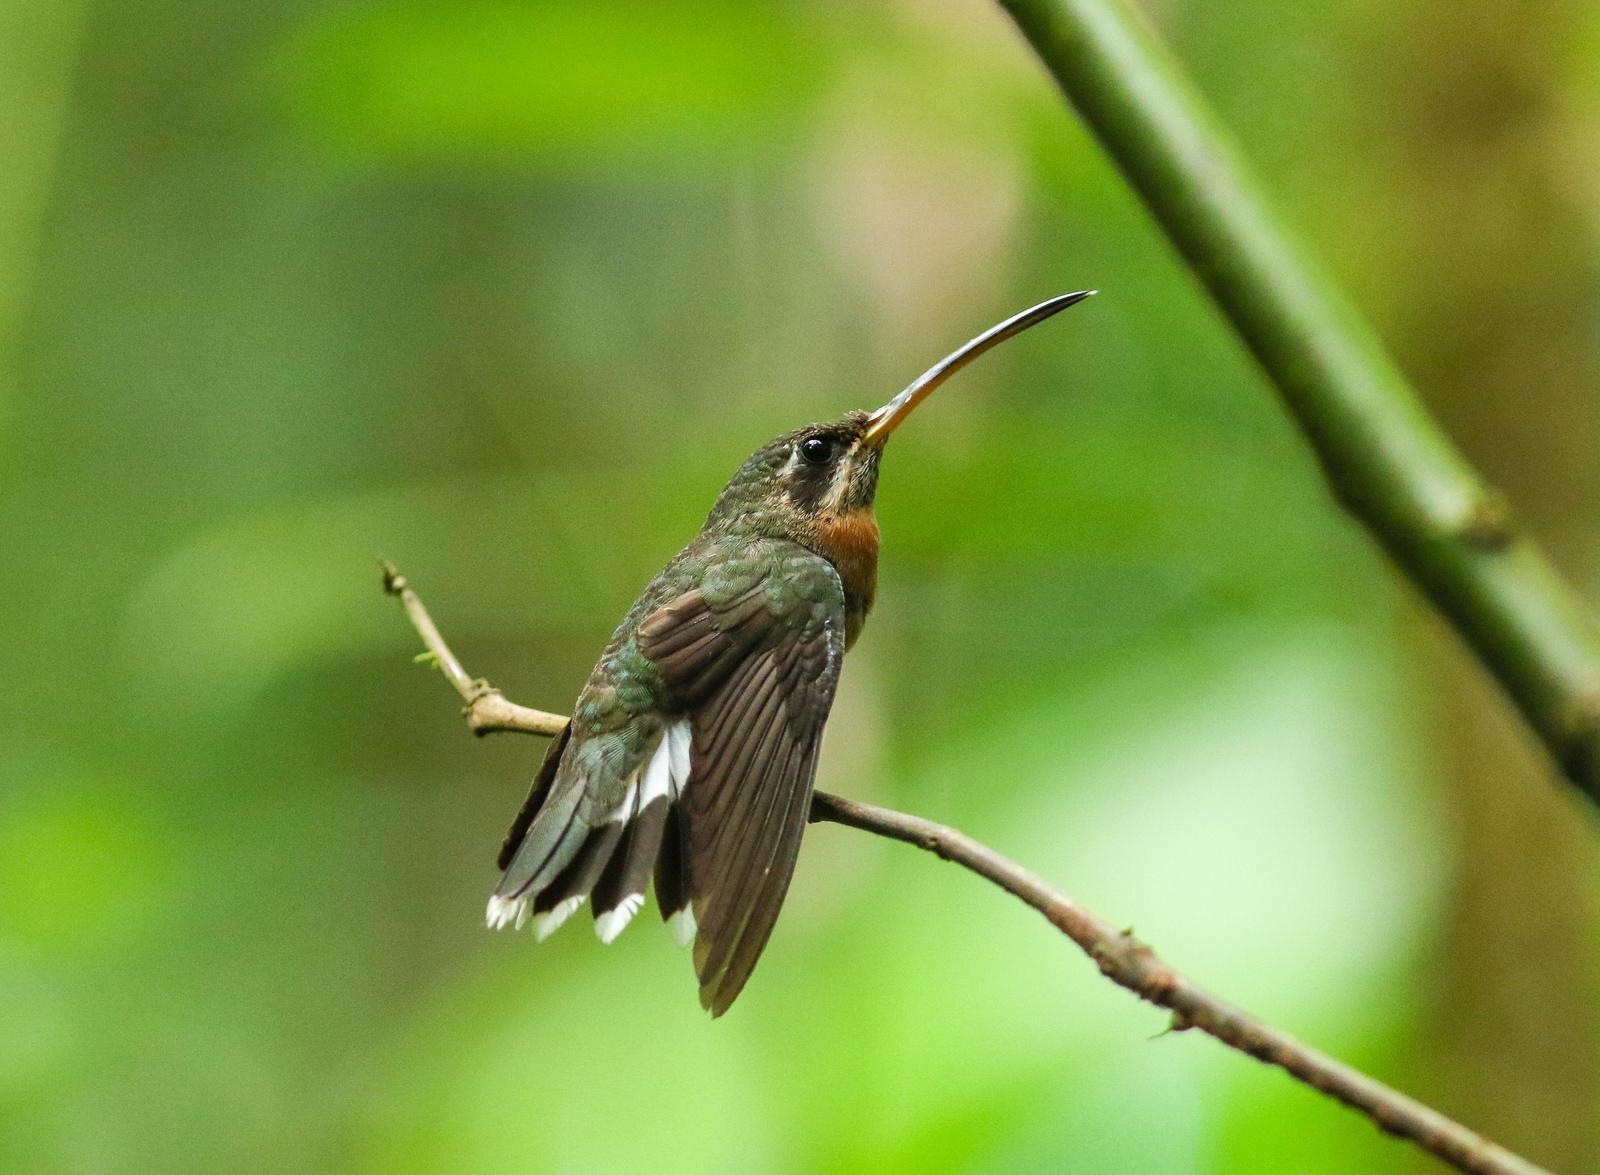 Band-tailed Barbthroat Photo by Leonardo Garrigues